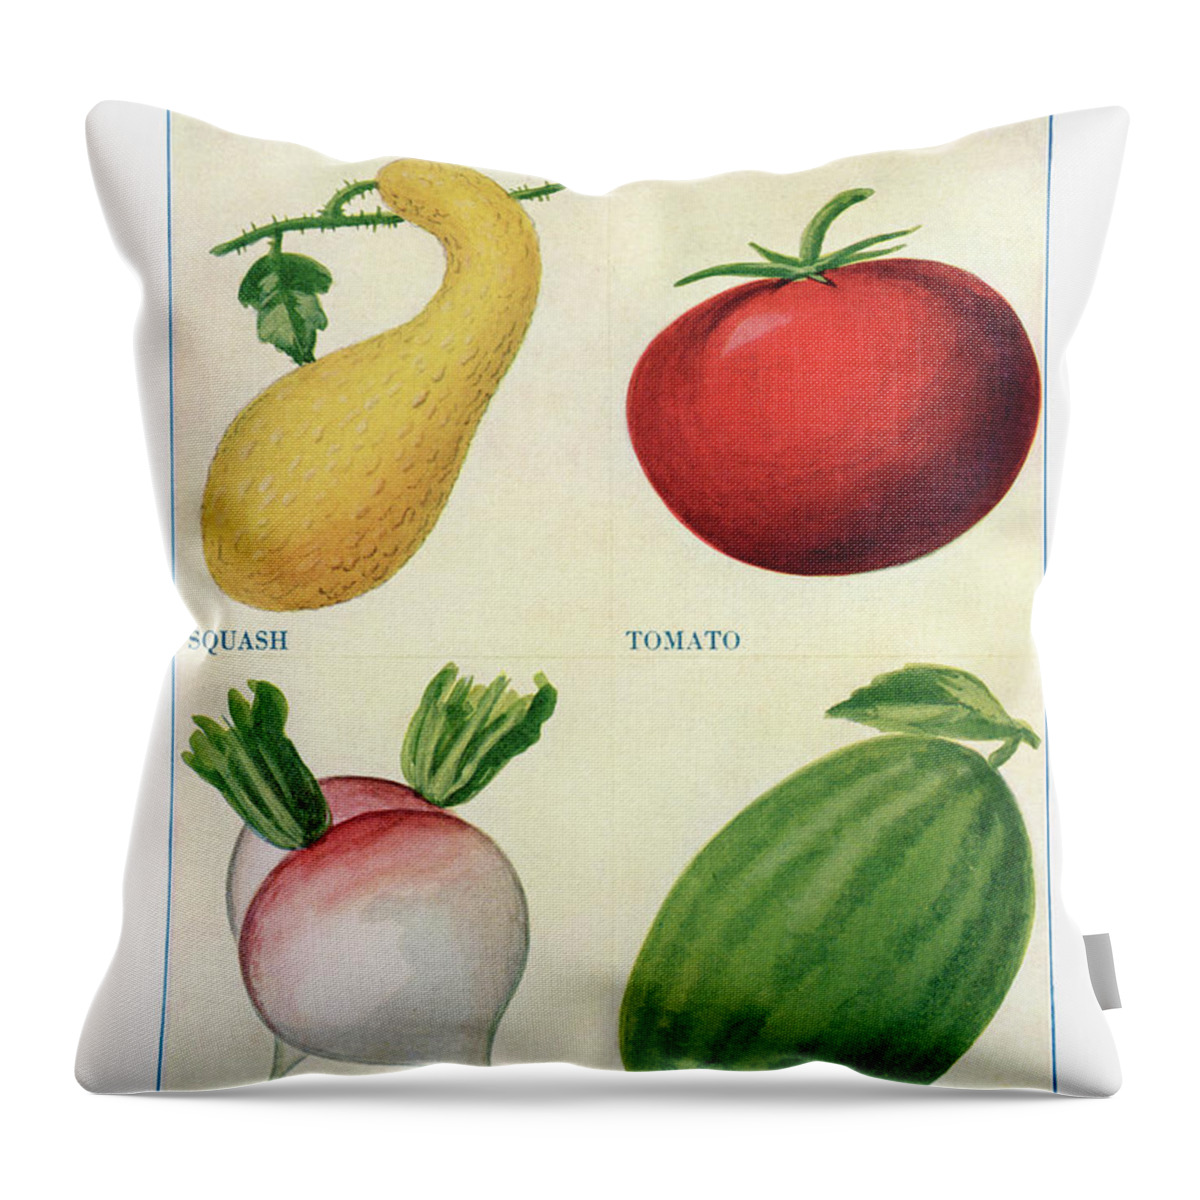 Squash Throw Pillow featuring the digital art Garden vegetable 06 - Vintage Farm Illustration - The Open Door to Independence by Studio Grafiikka